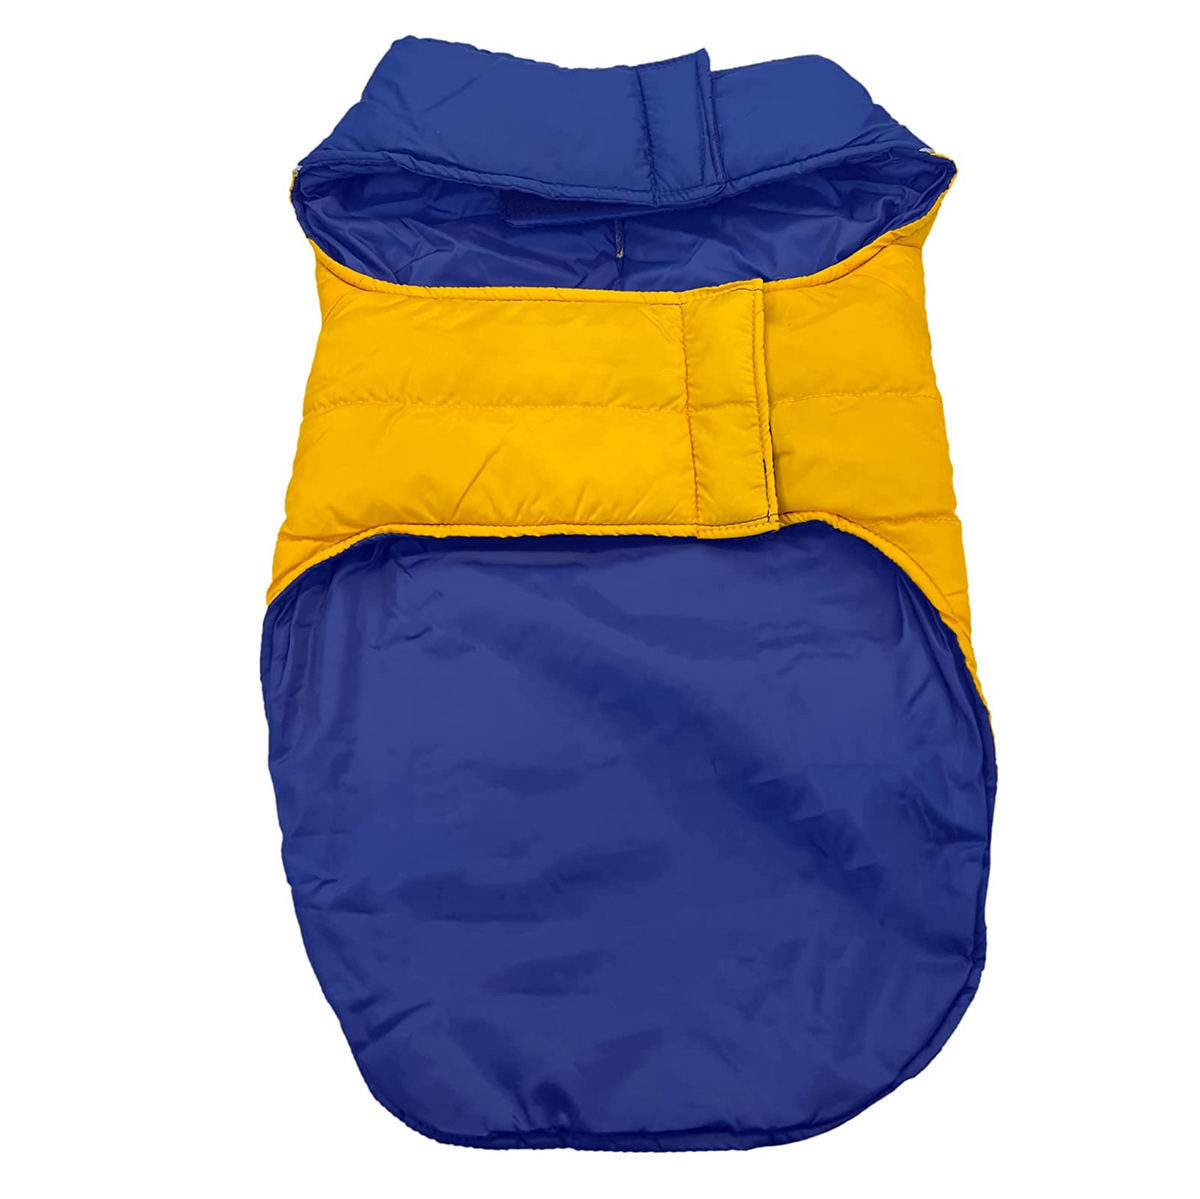 Golden State Warriors Game Day Puffer Vest